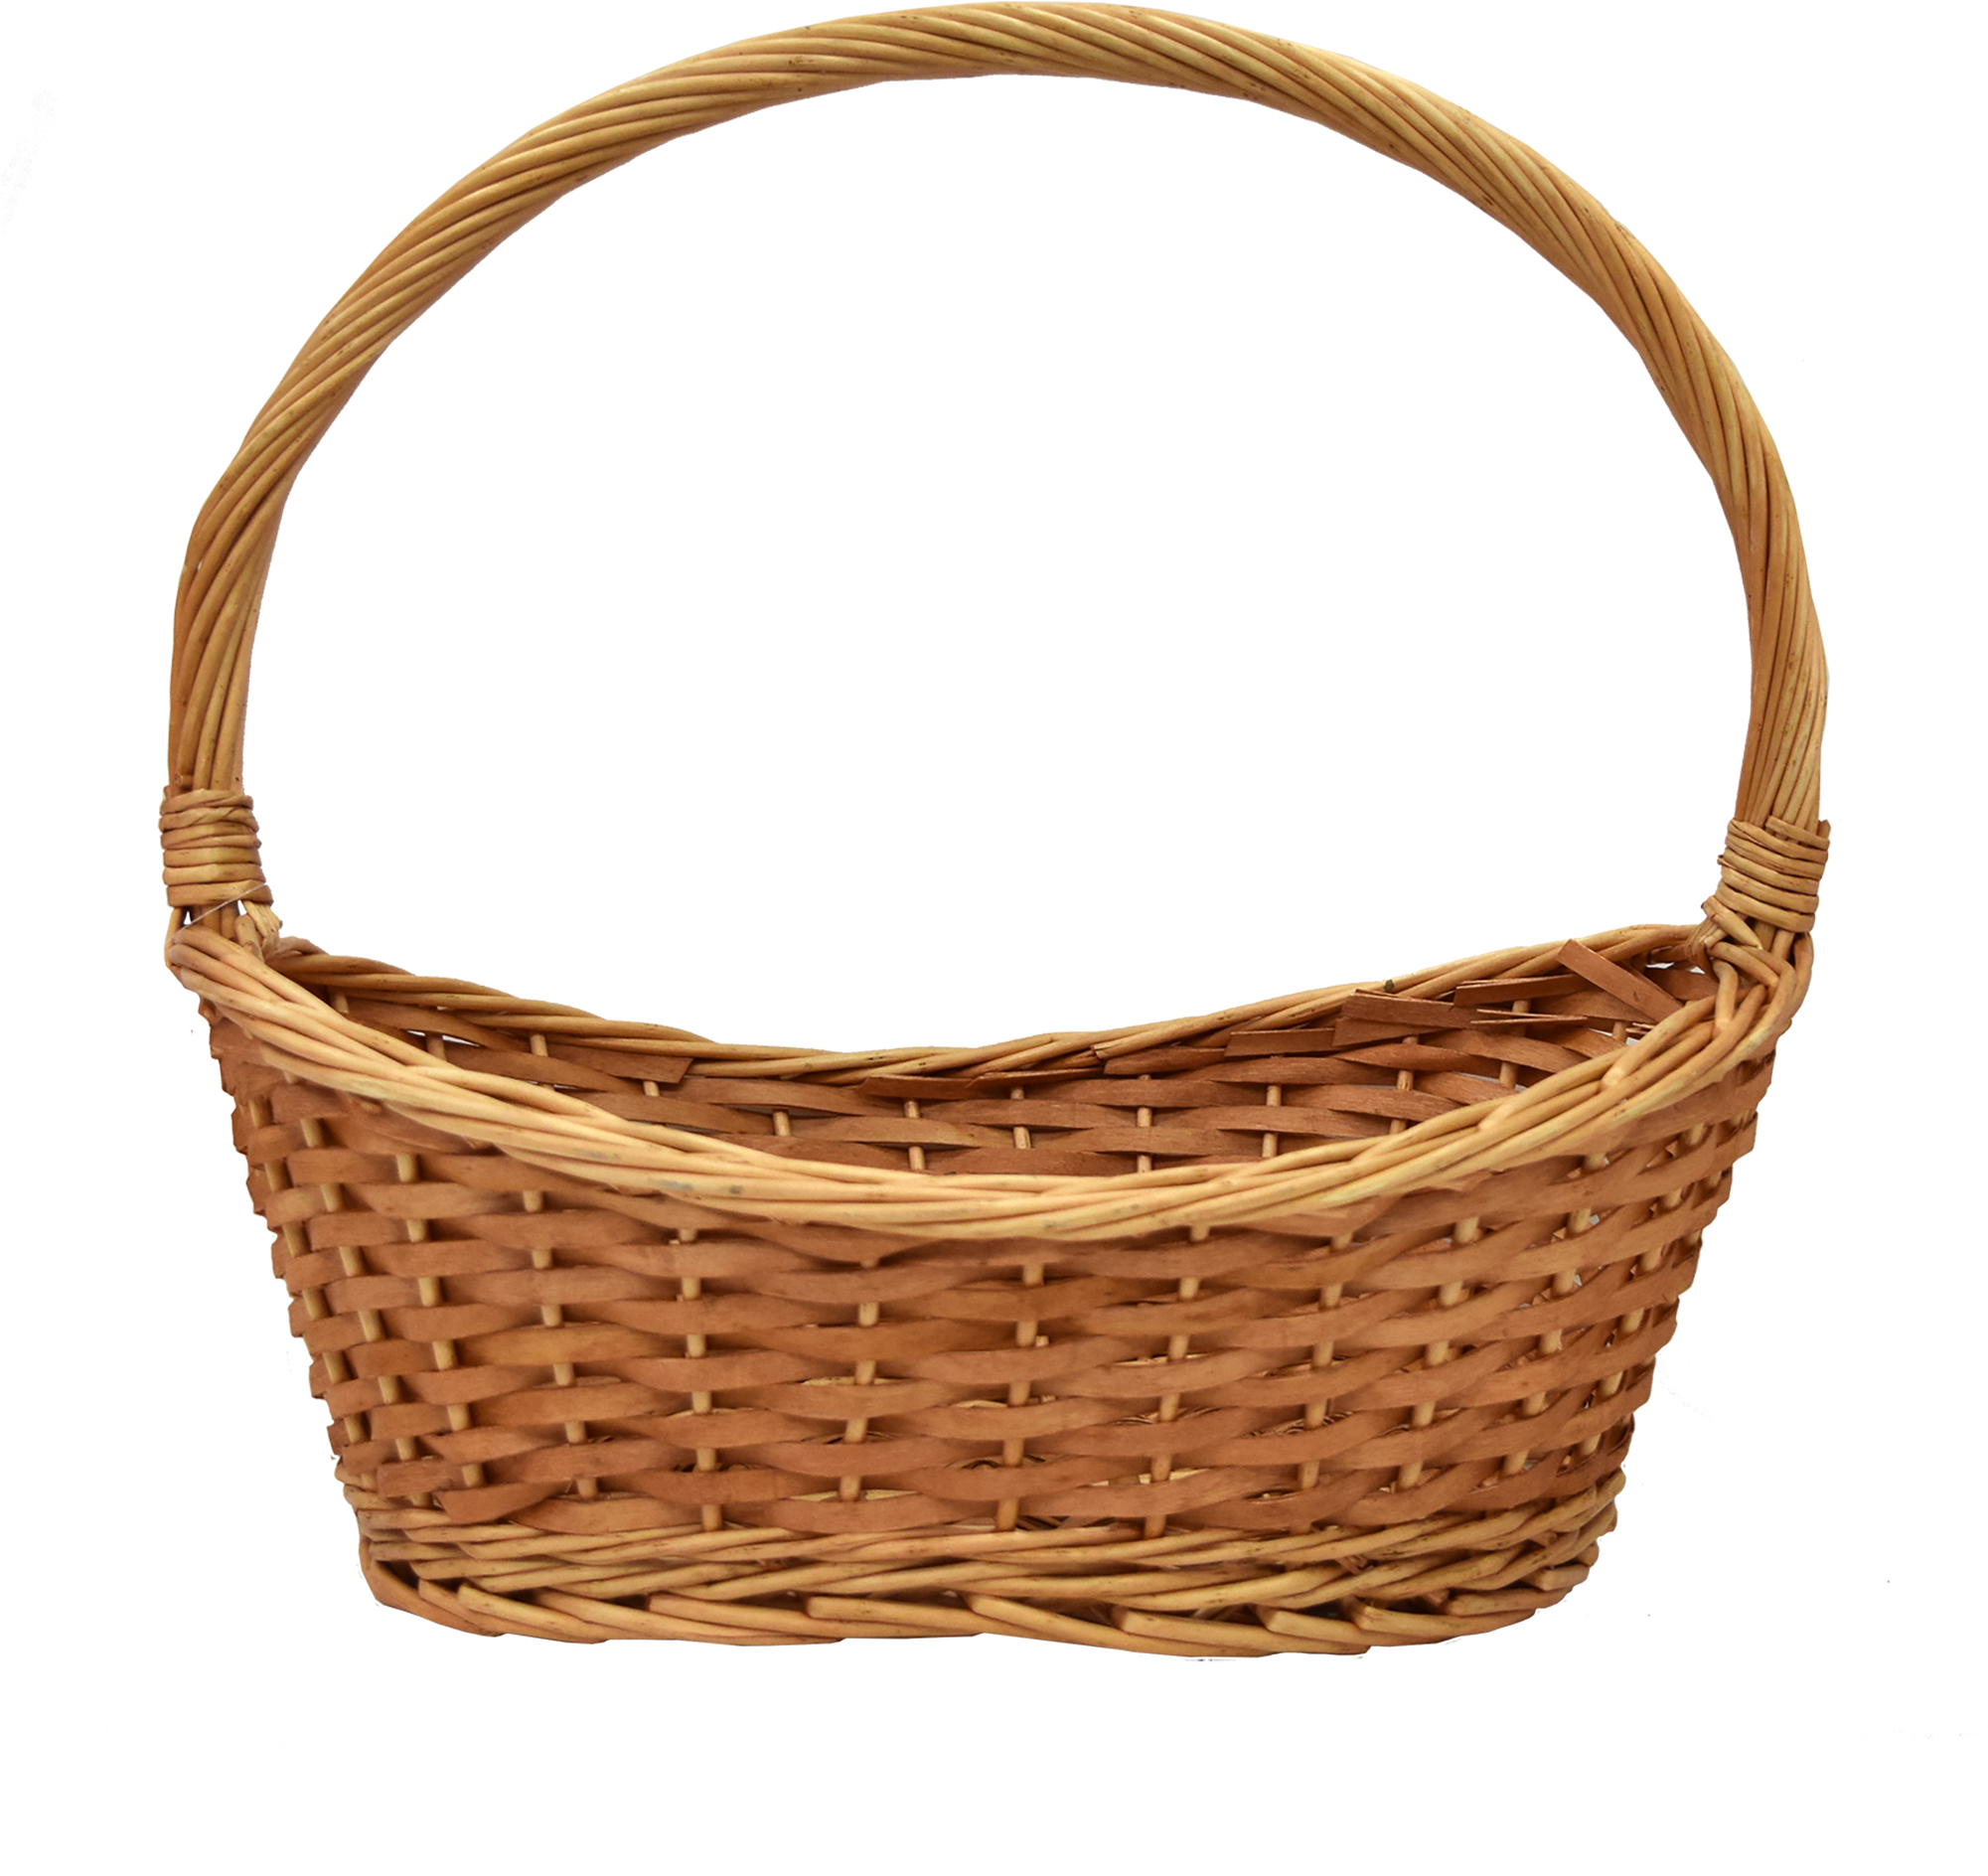 Round Wicker Basket With - Basket - (2000x2000) Png Clipart Download. 